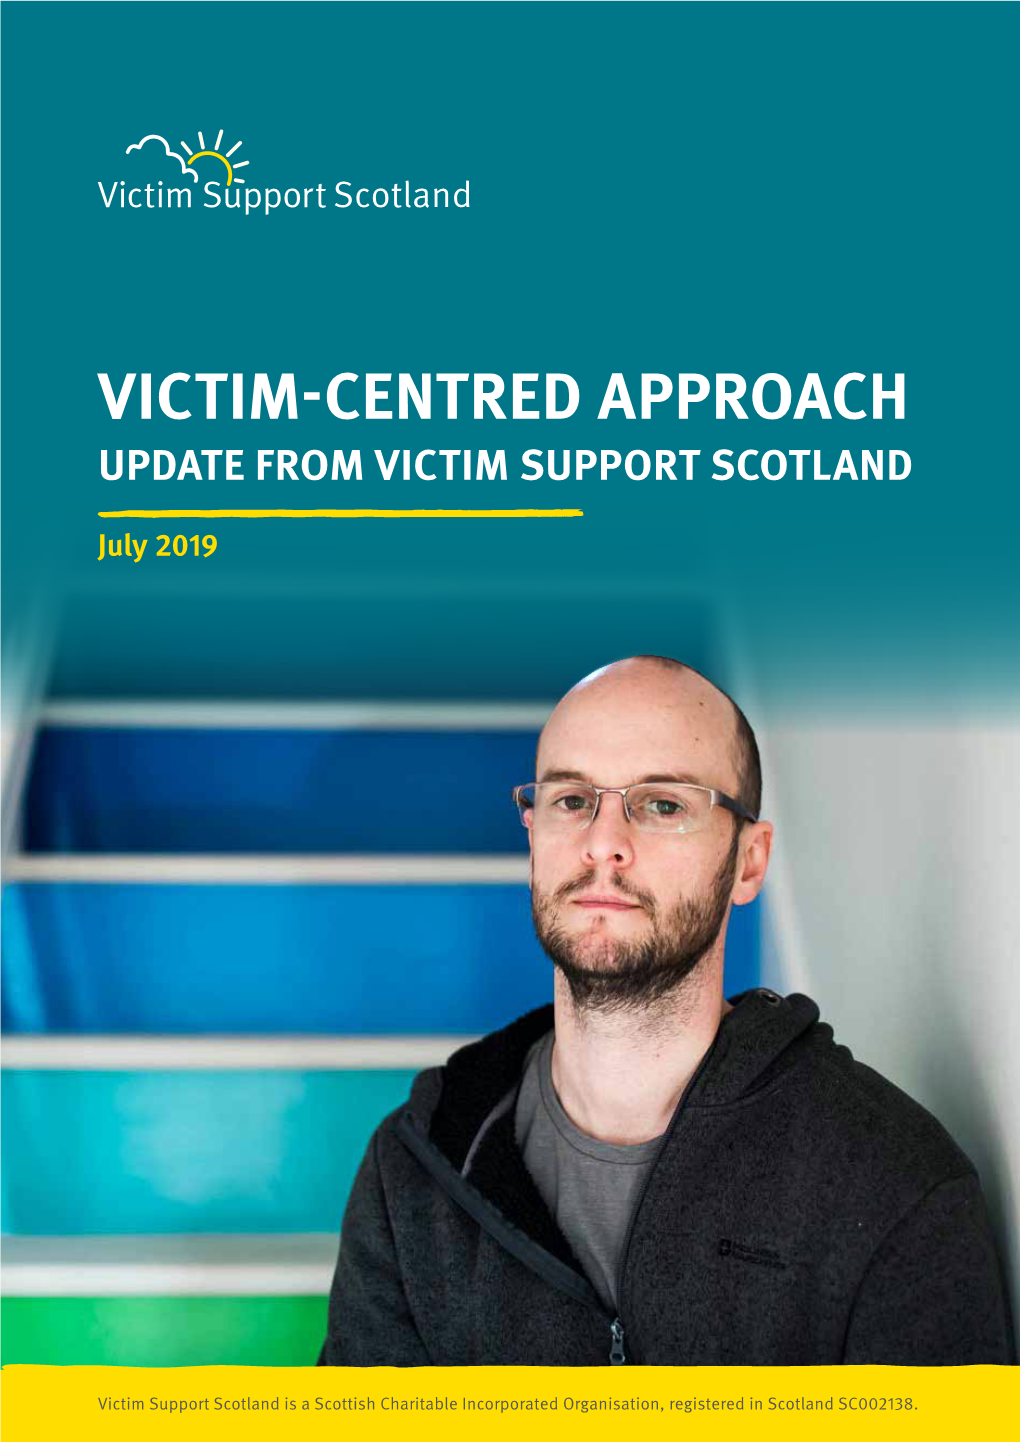 Victim-Centred Approach Update from Victim Support Scotland